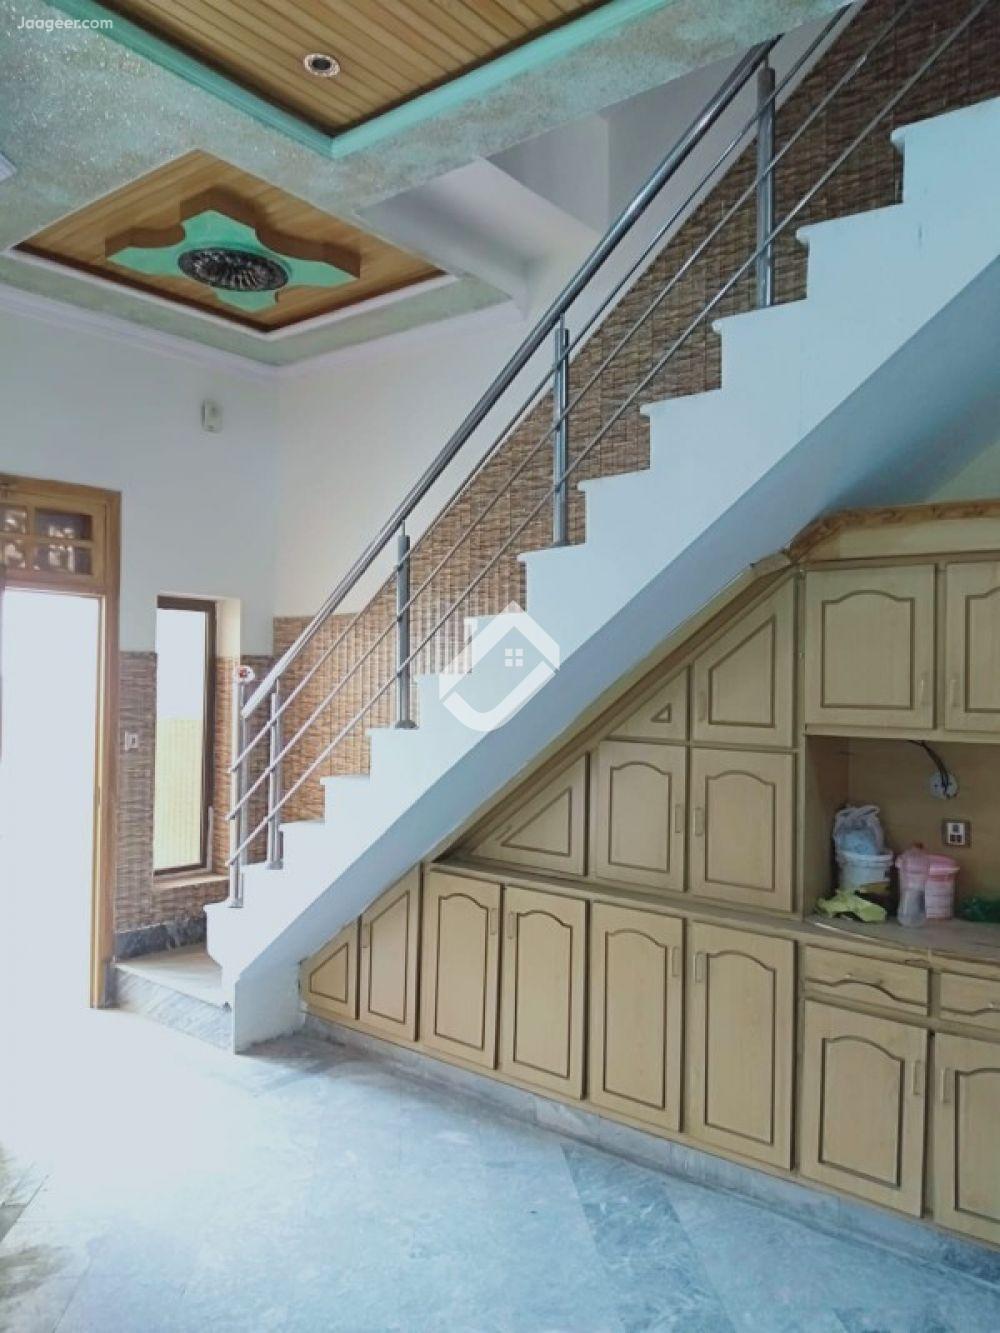 View  5 Marla Double Storey House For Rent In Old Satellite Town   in Old Satellite Town, Sargodha